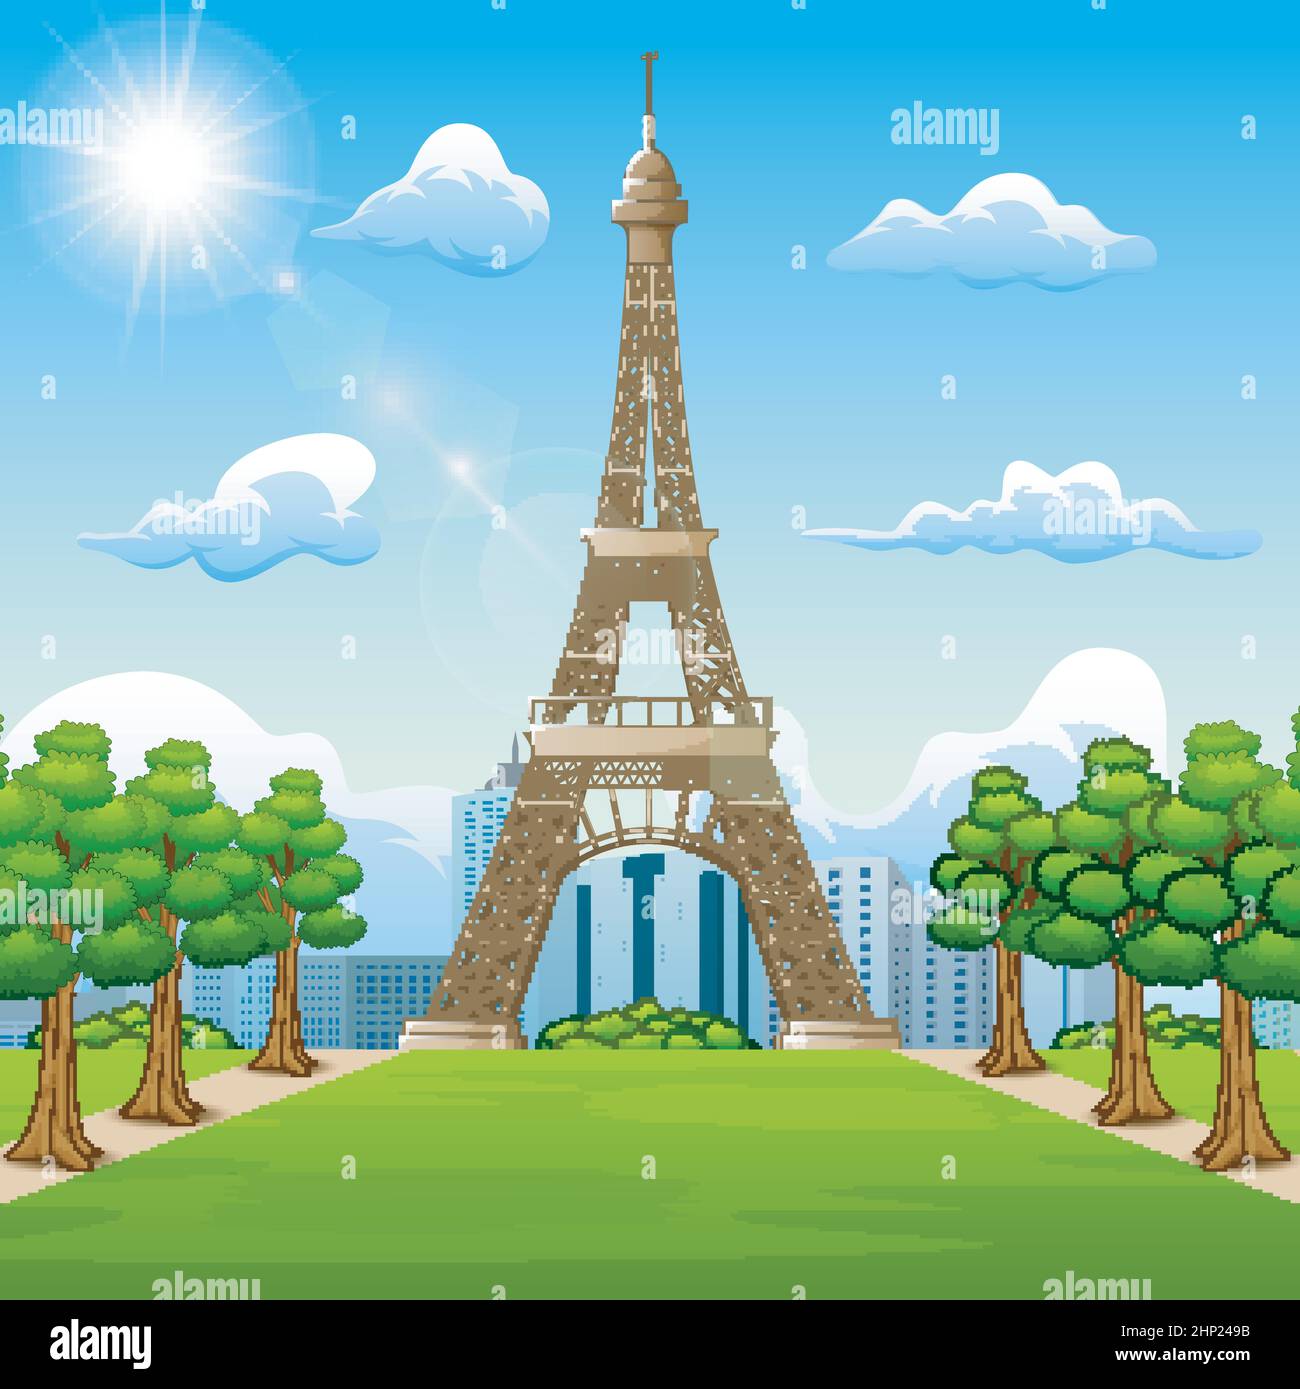 Illustration of landscape background with Eiffel Tower Stock Vector